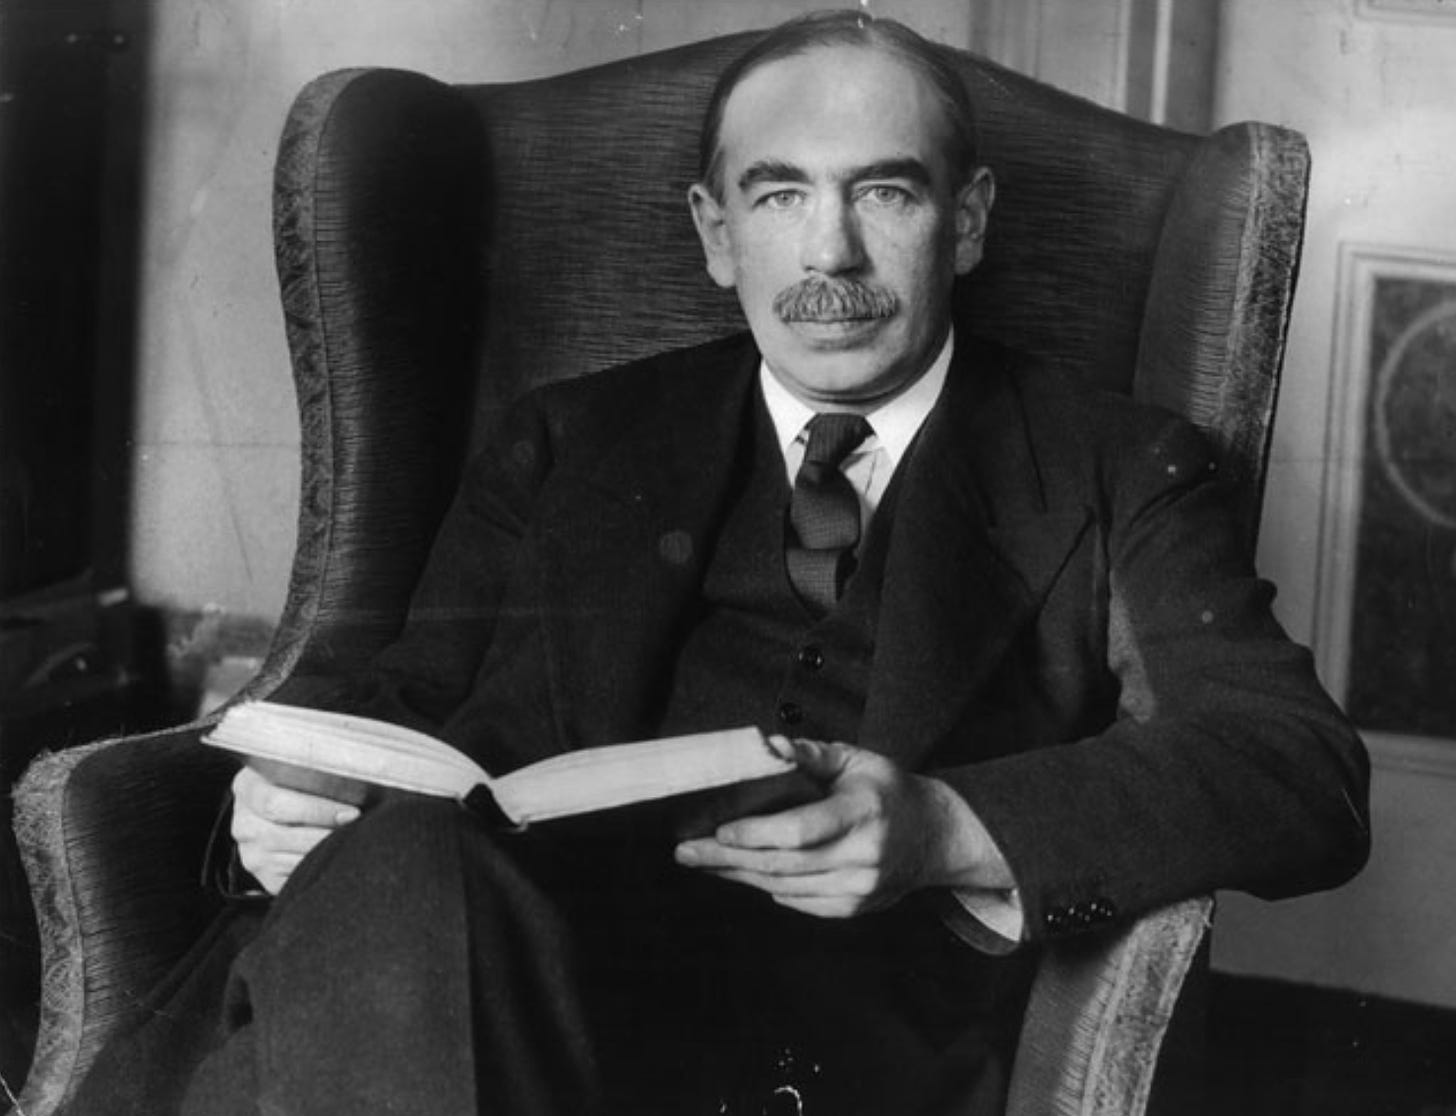 John Maynard Keynes gripping a book - black and white photo. He has a moustache and looks very serious!